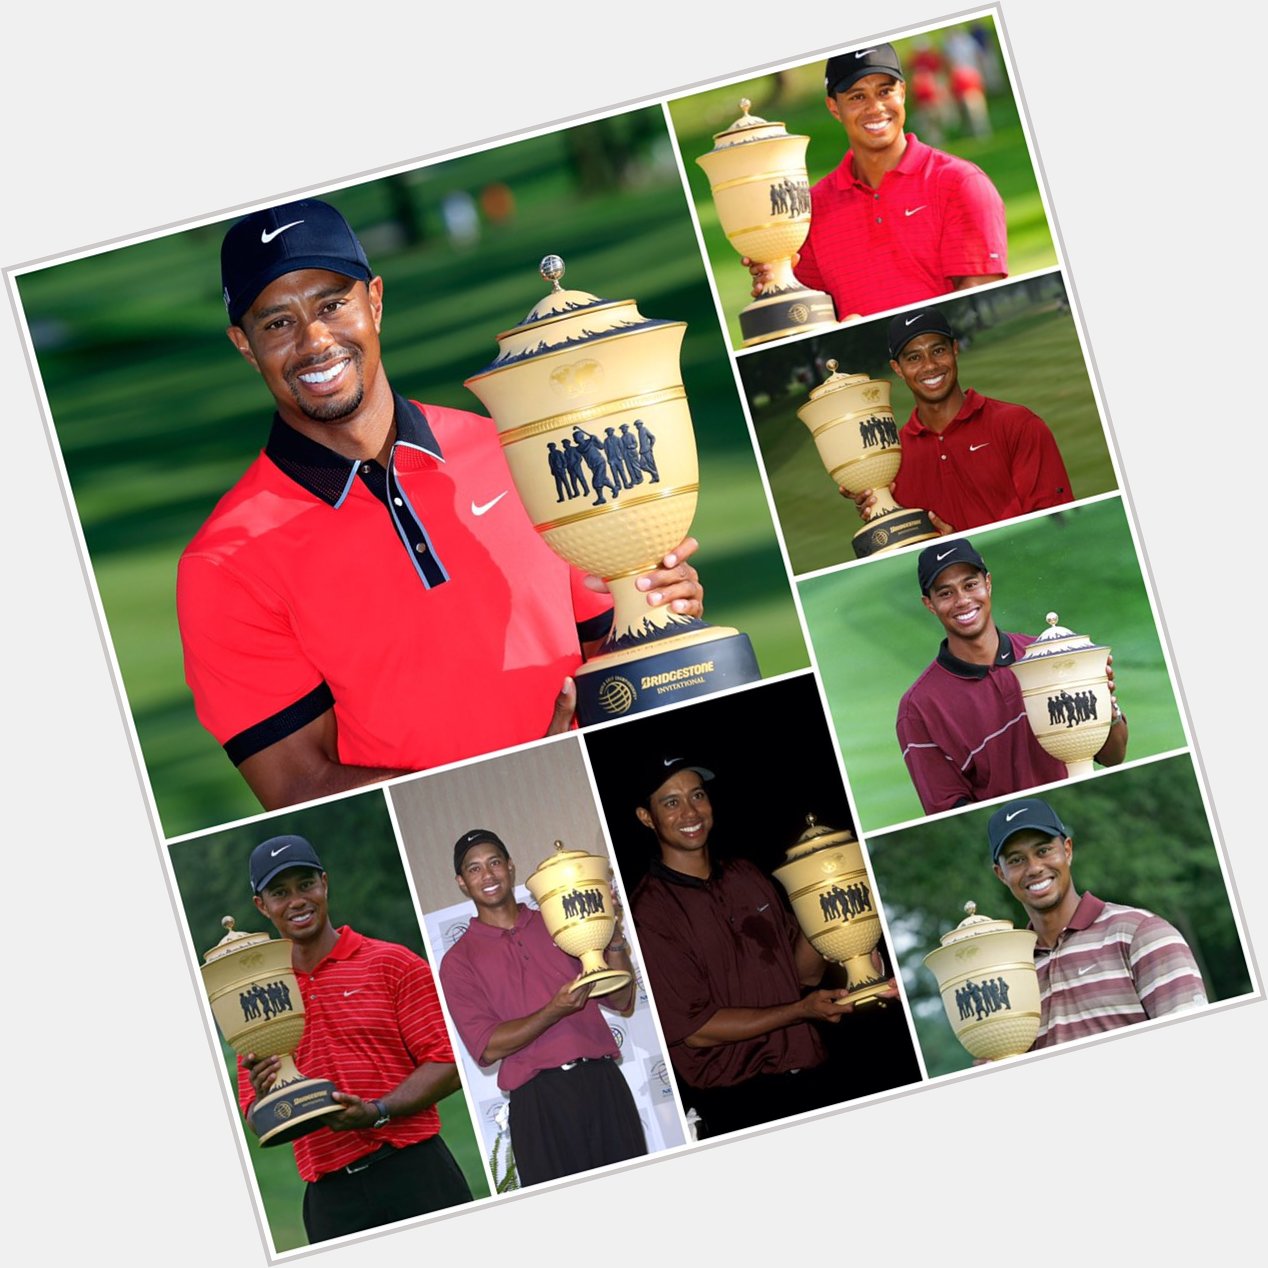 Happy birthday to 8-time winner Tiger Woods! 

Relive his greatest moments:  